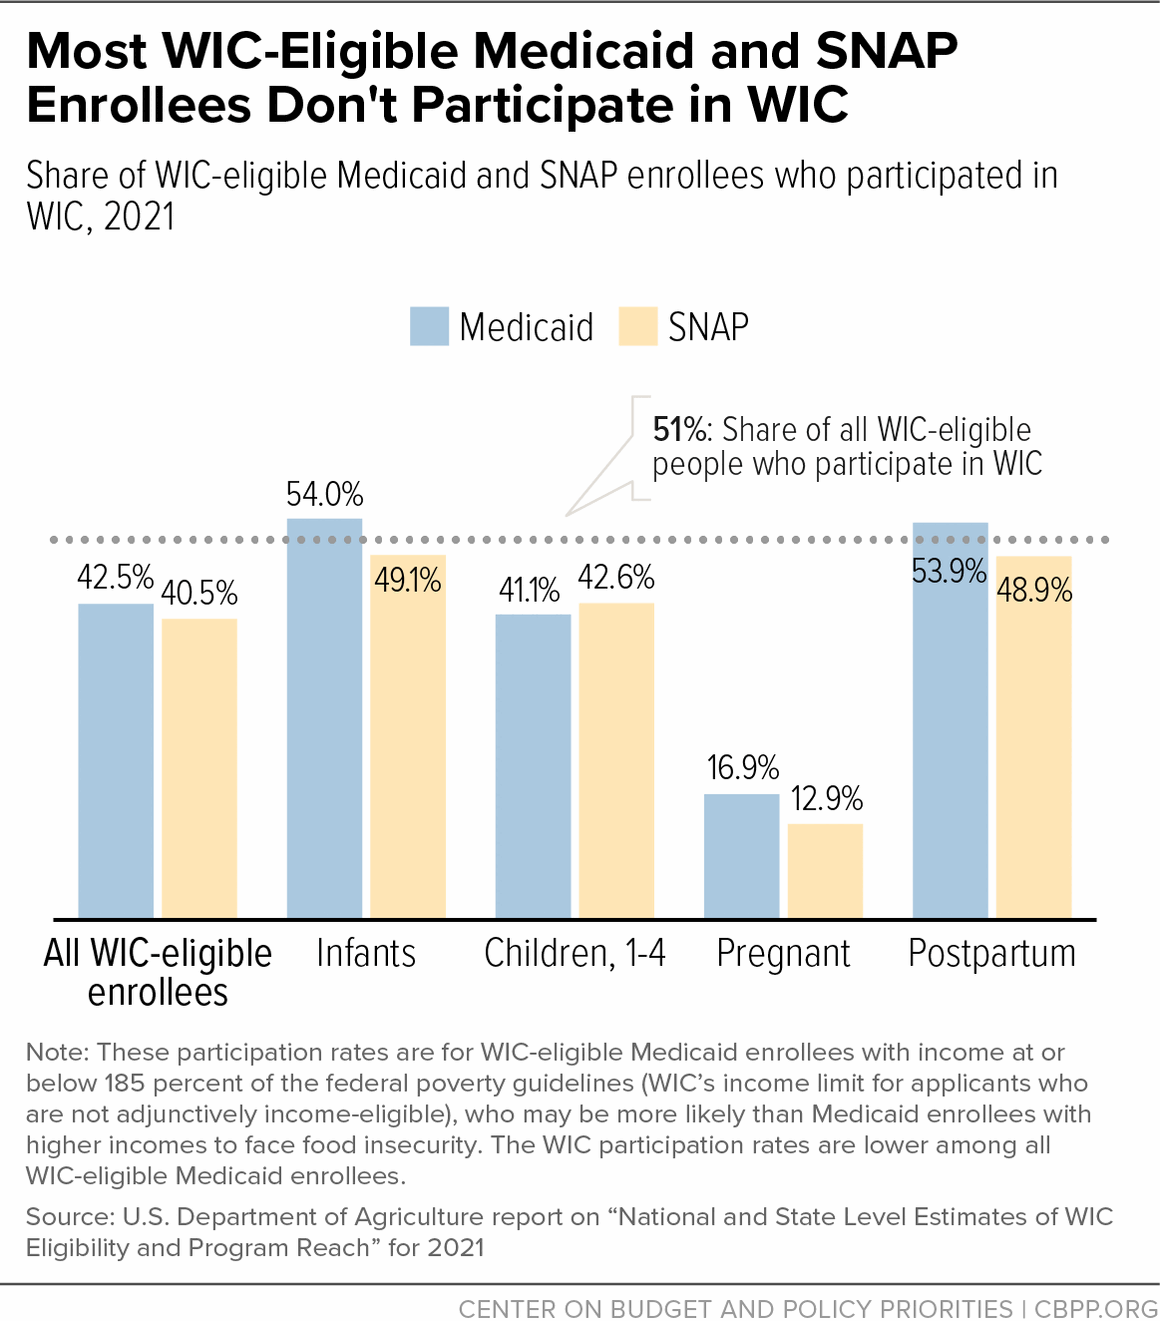 Most WIC-Eligible Medicaid and SNAP Enrollees Don't Participate in WIC